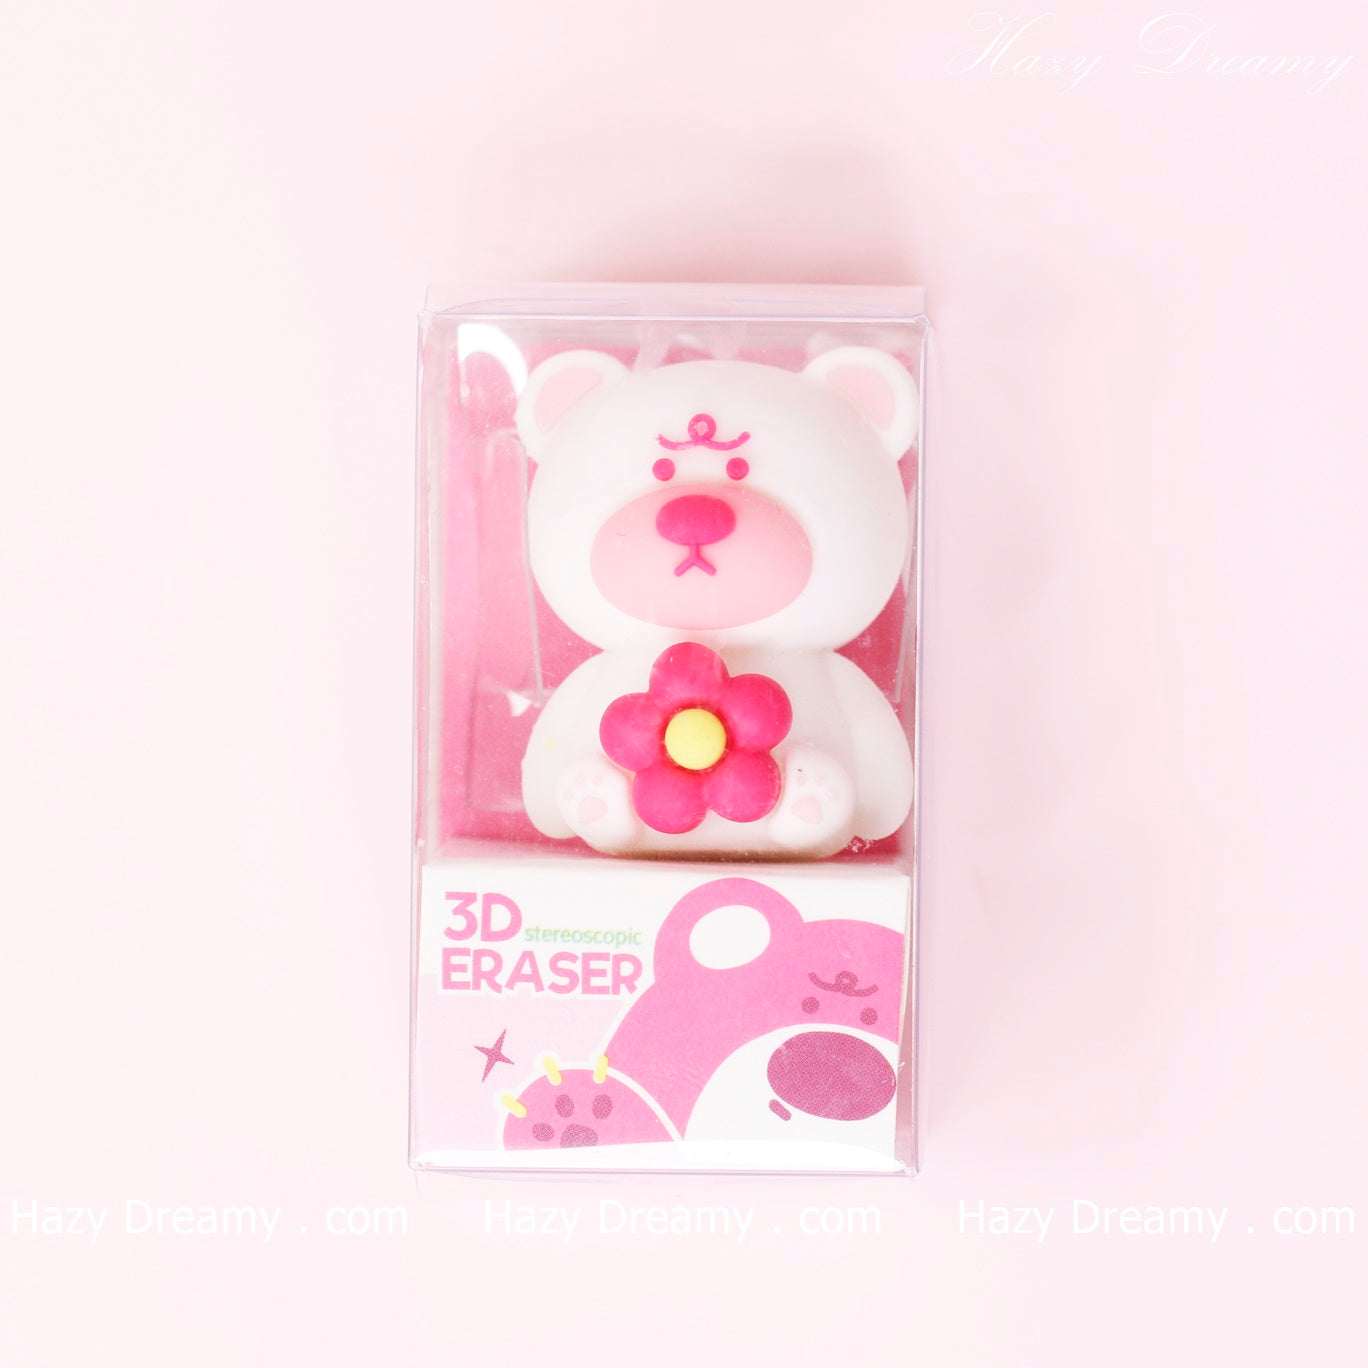 Charming White Bear 3D Eraser - Ideal for Kids and Stationery Enthusiasts